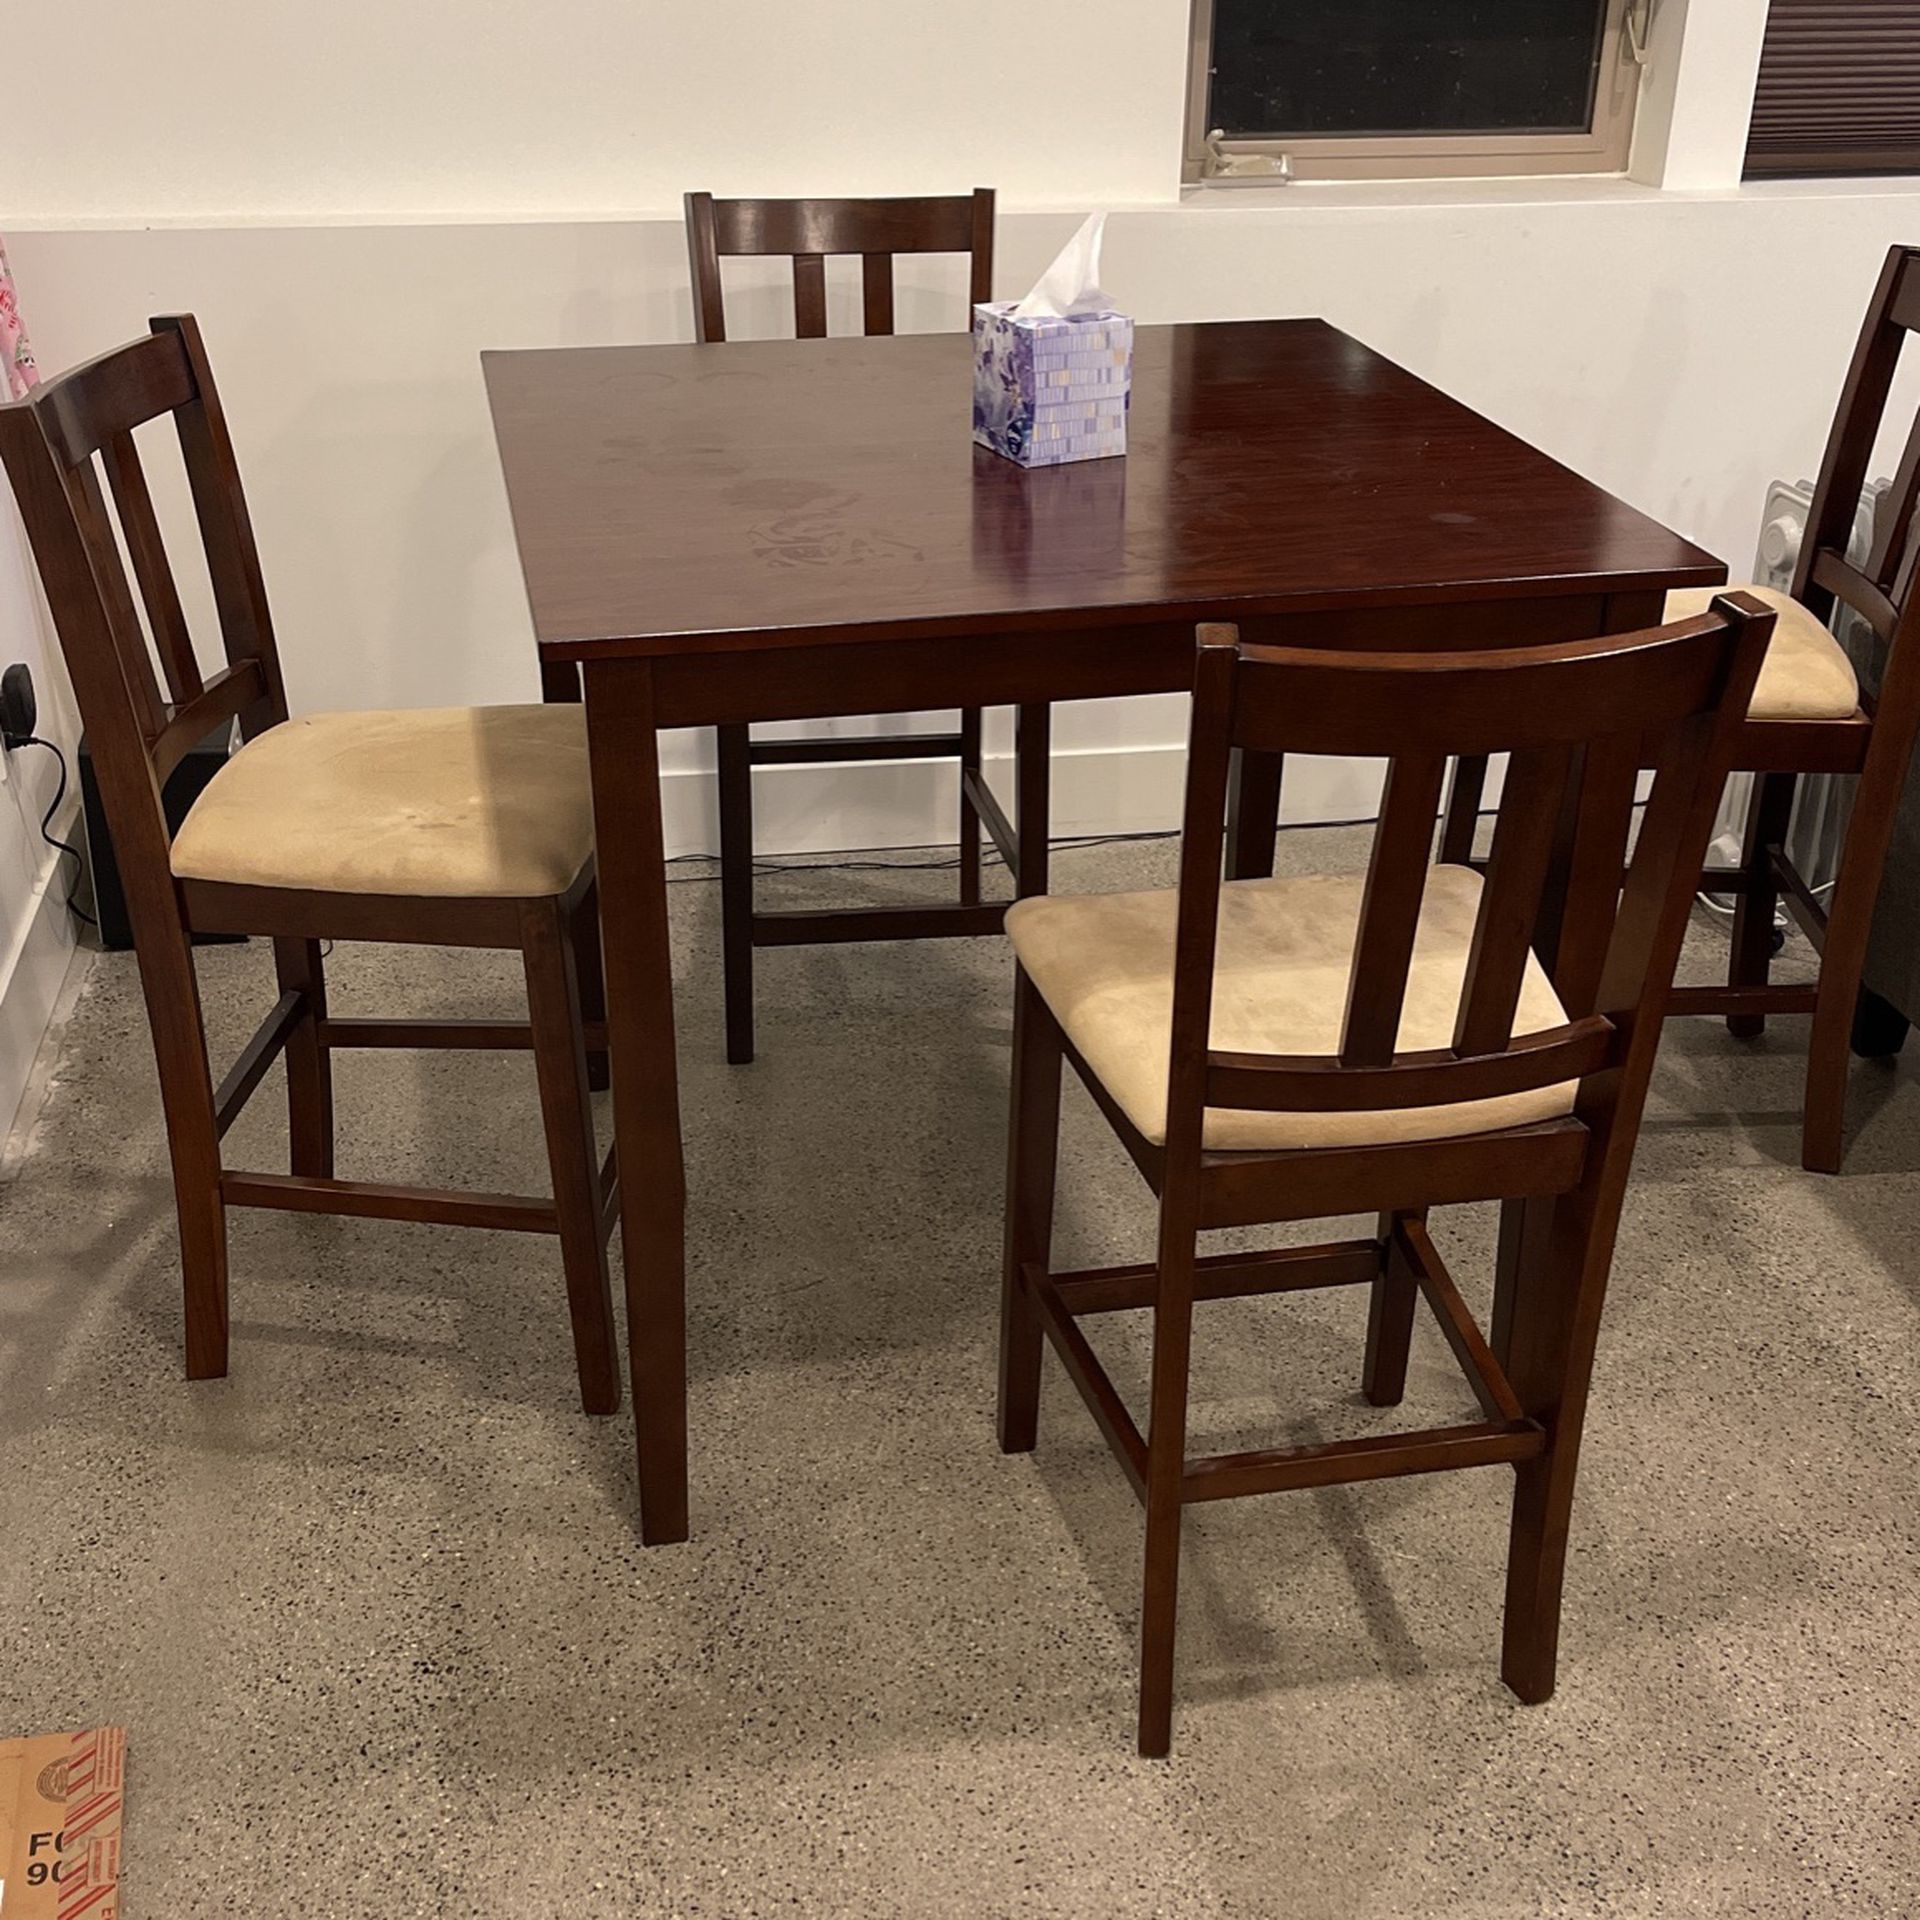 Tall Wood Dining Set (4 Chairs + Table)